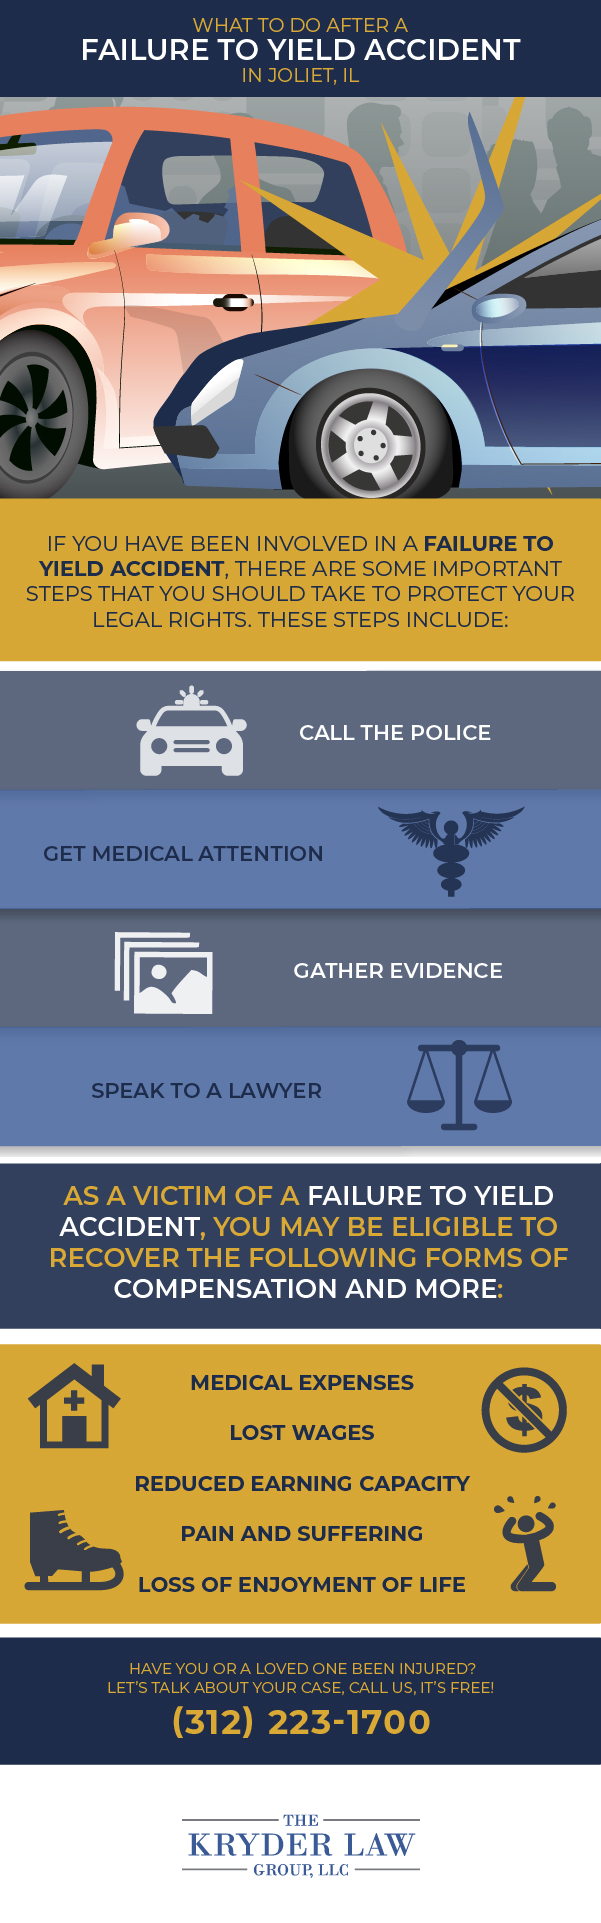 Joliet Failure to Yield Accident Lawyer Infographic